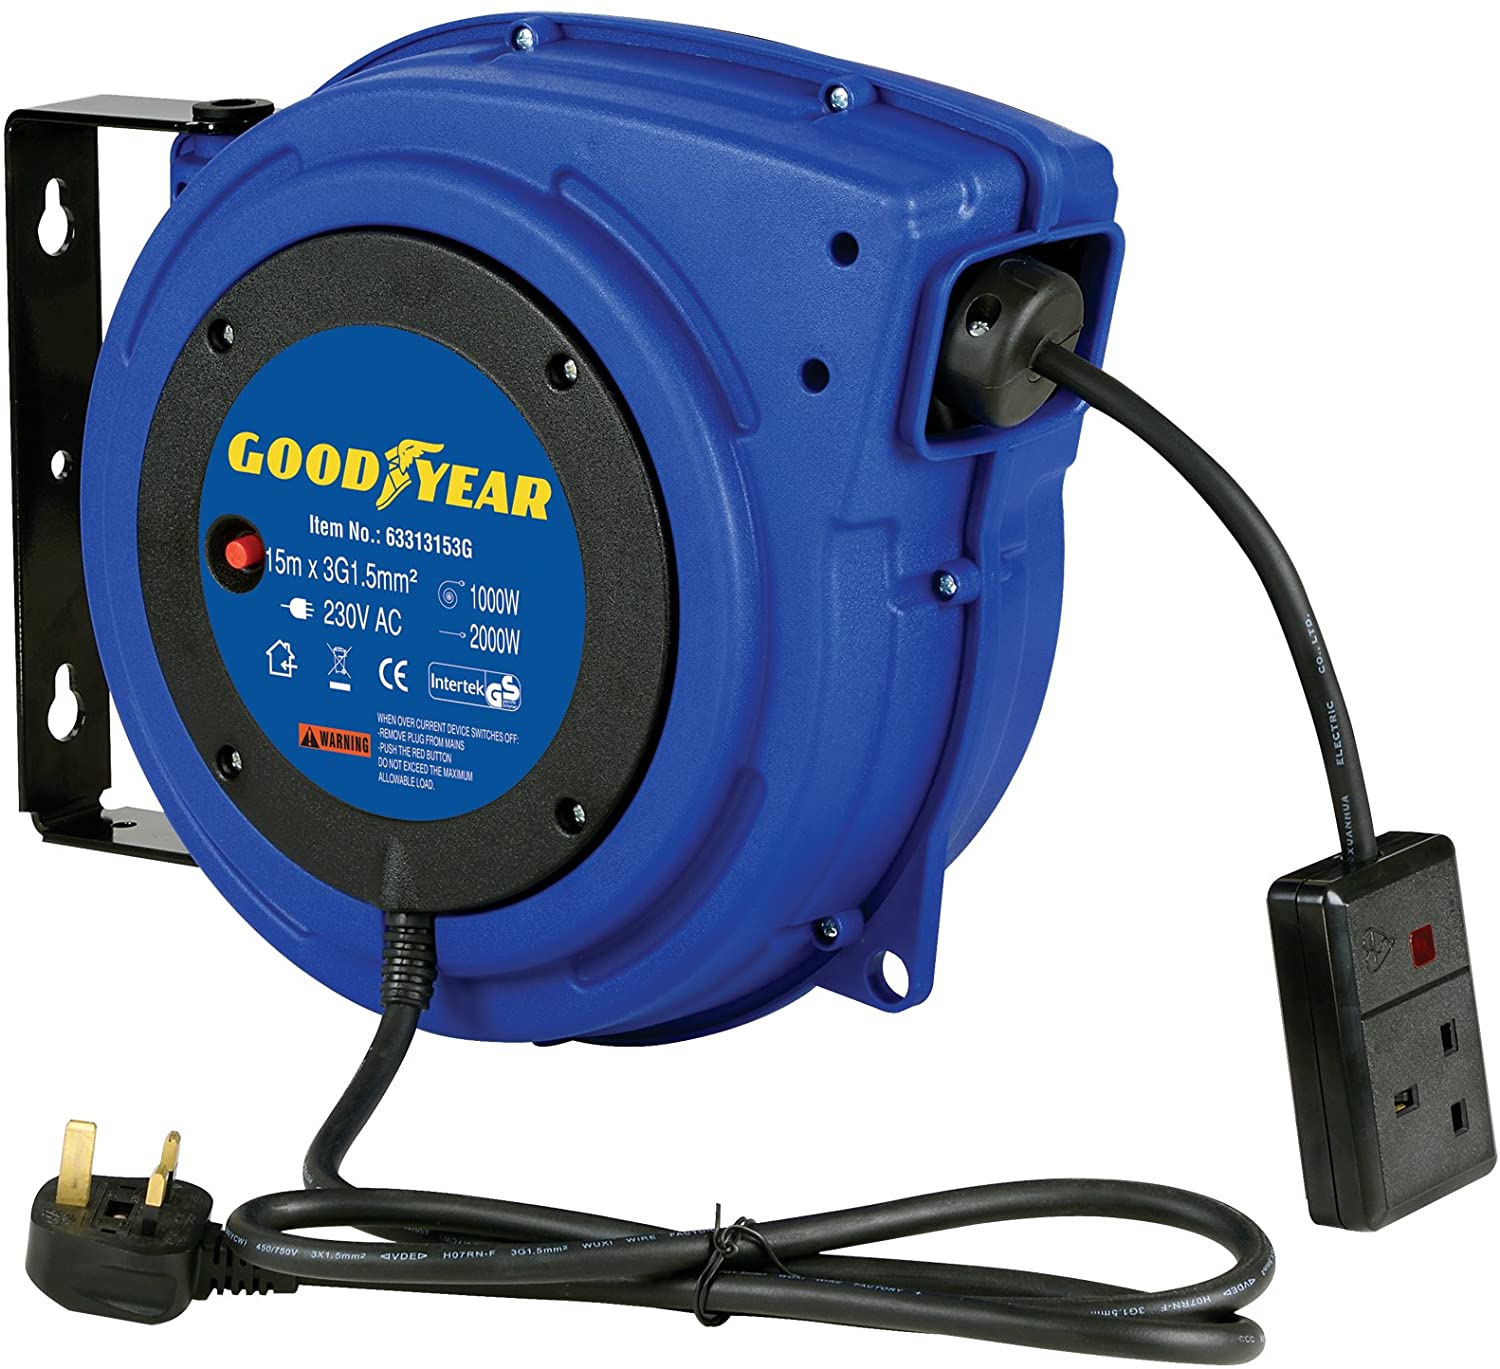 Goodyear Heavy Duty Extension Cable Reel: Retractable 15m x 3G1.5mm2 H